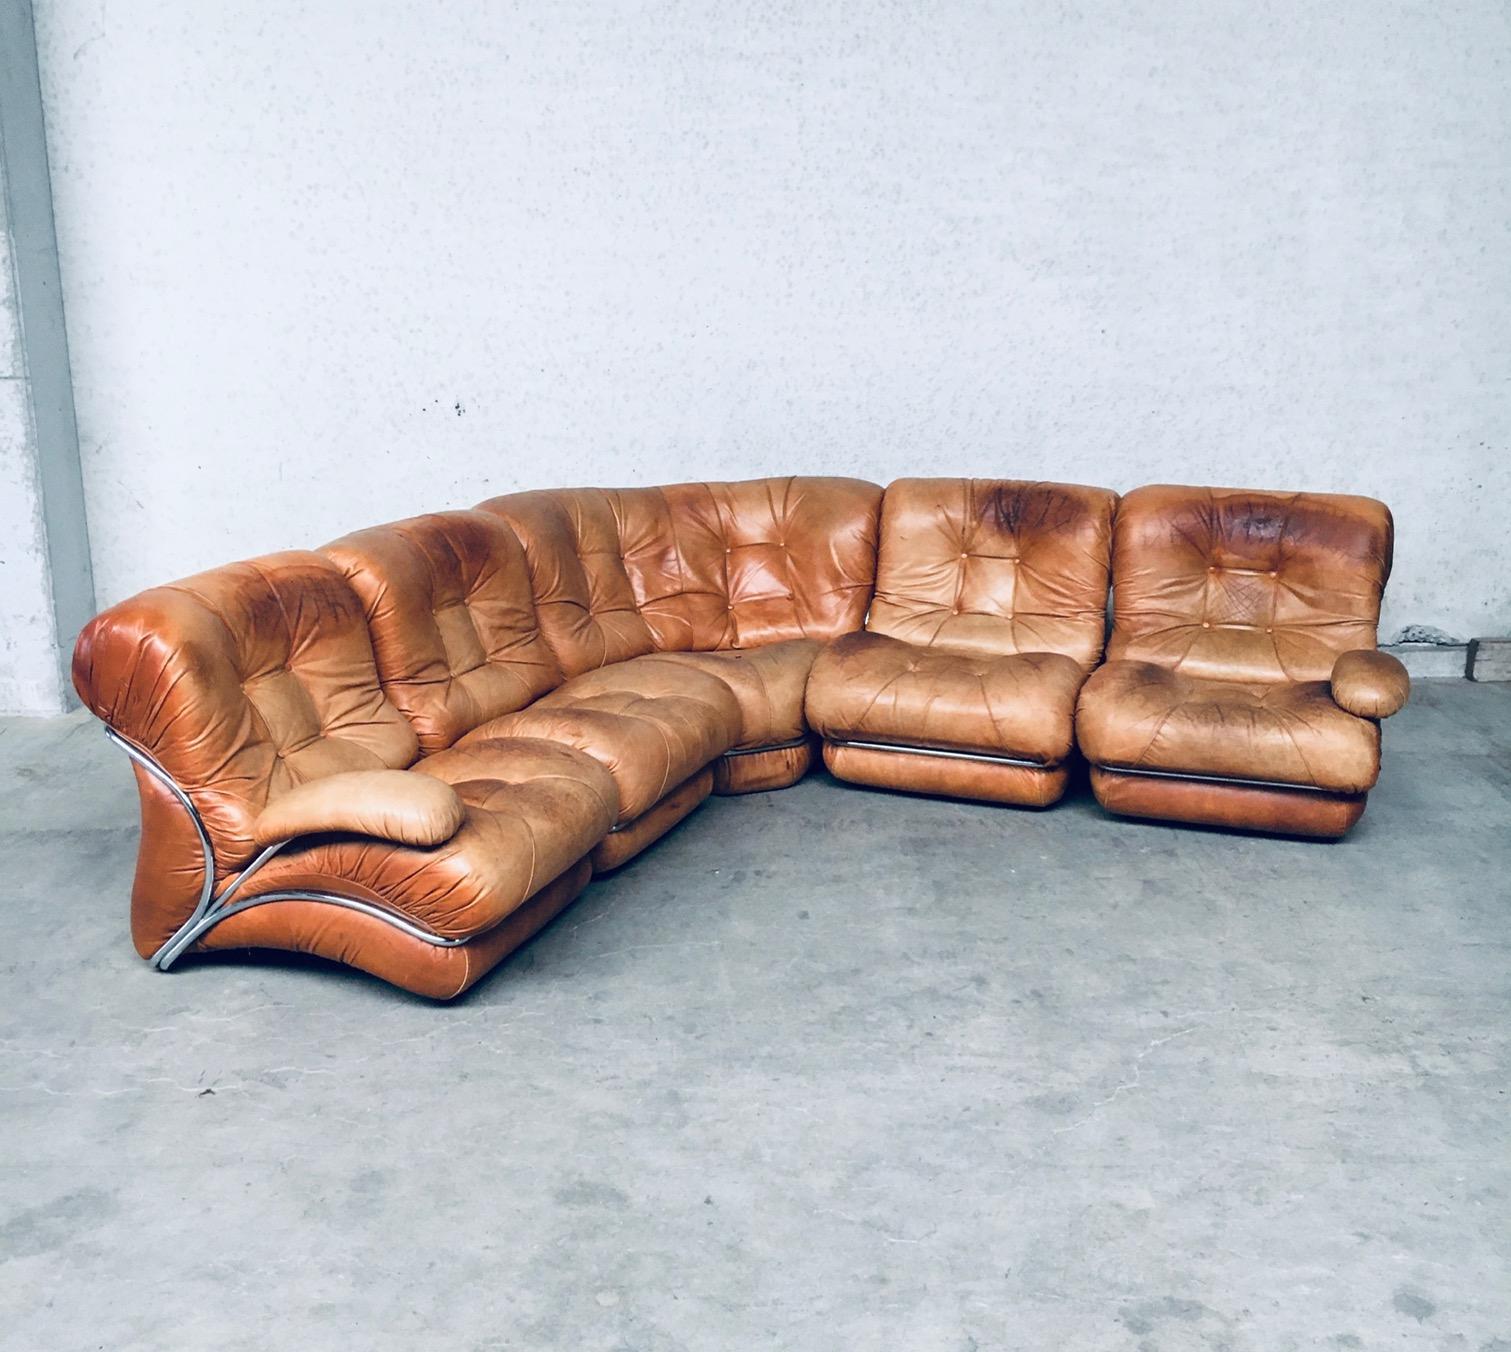 Late 20th Century Italian Design COROLLA Leather Sectional Sofa by I.P.E. Italy 1970's For Sale